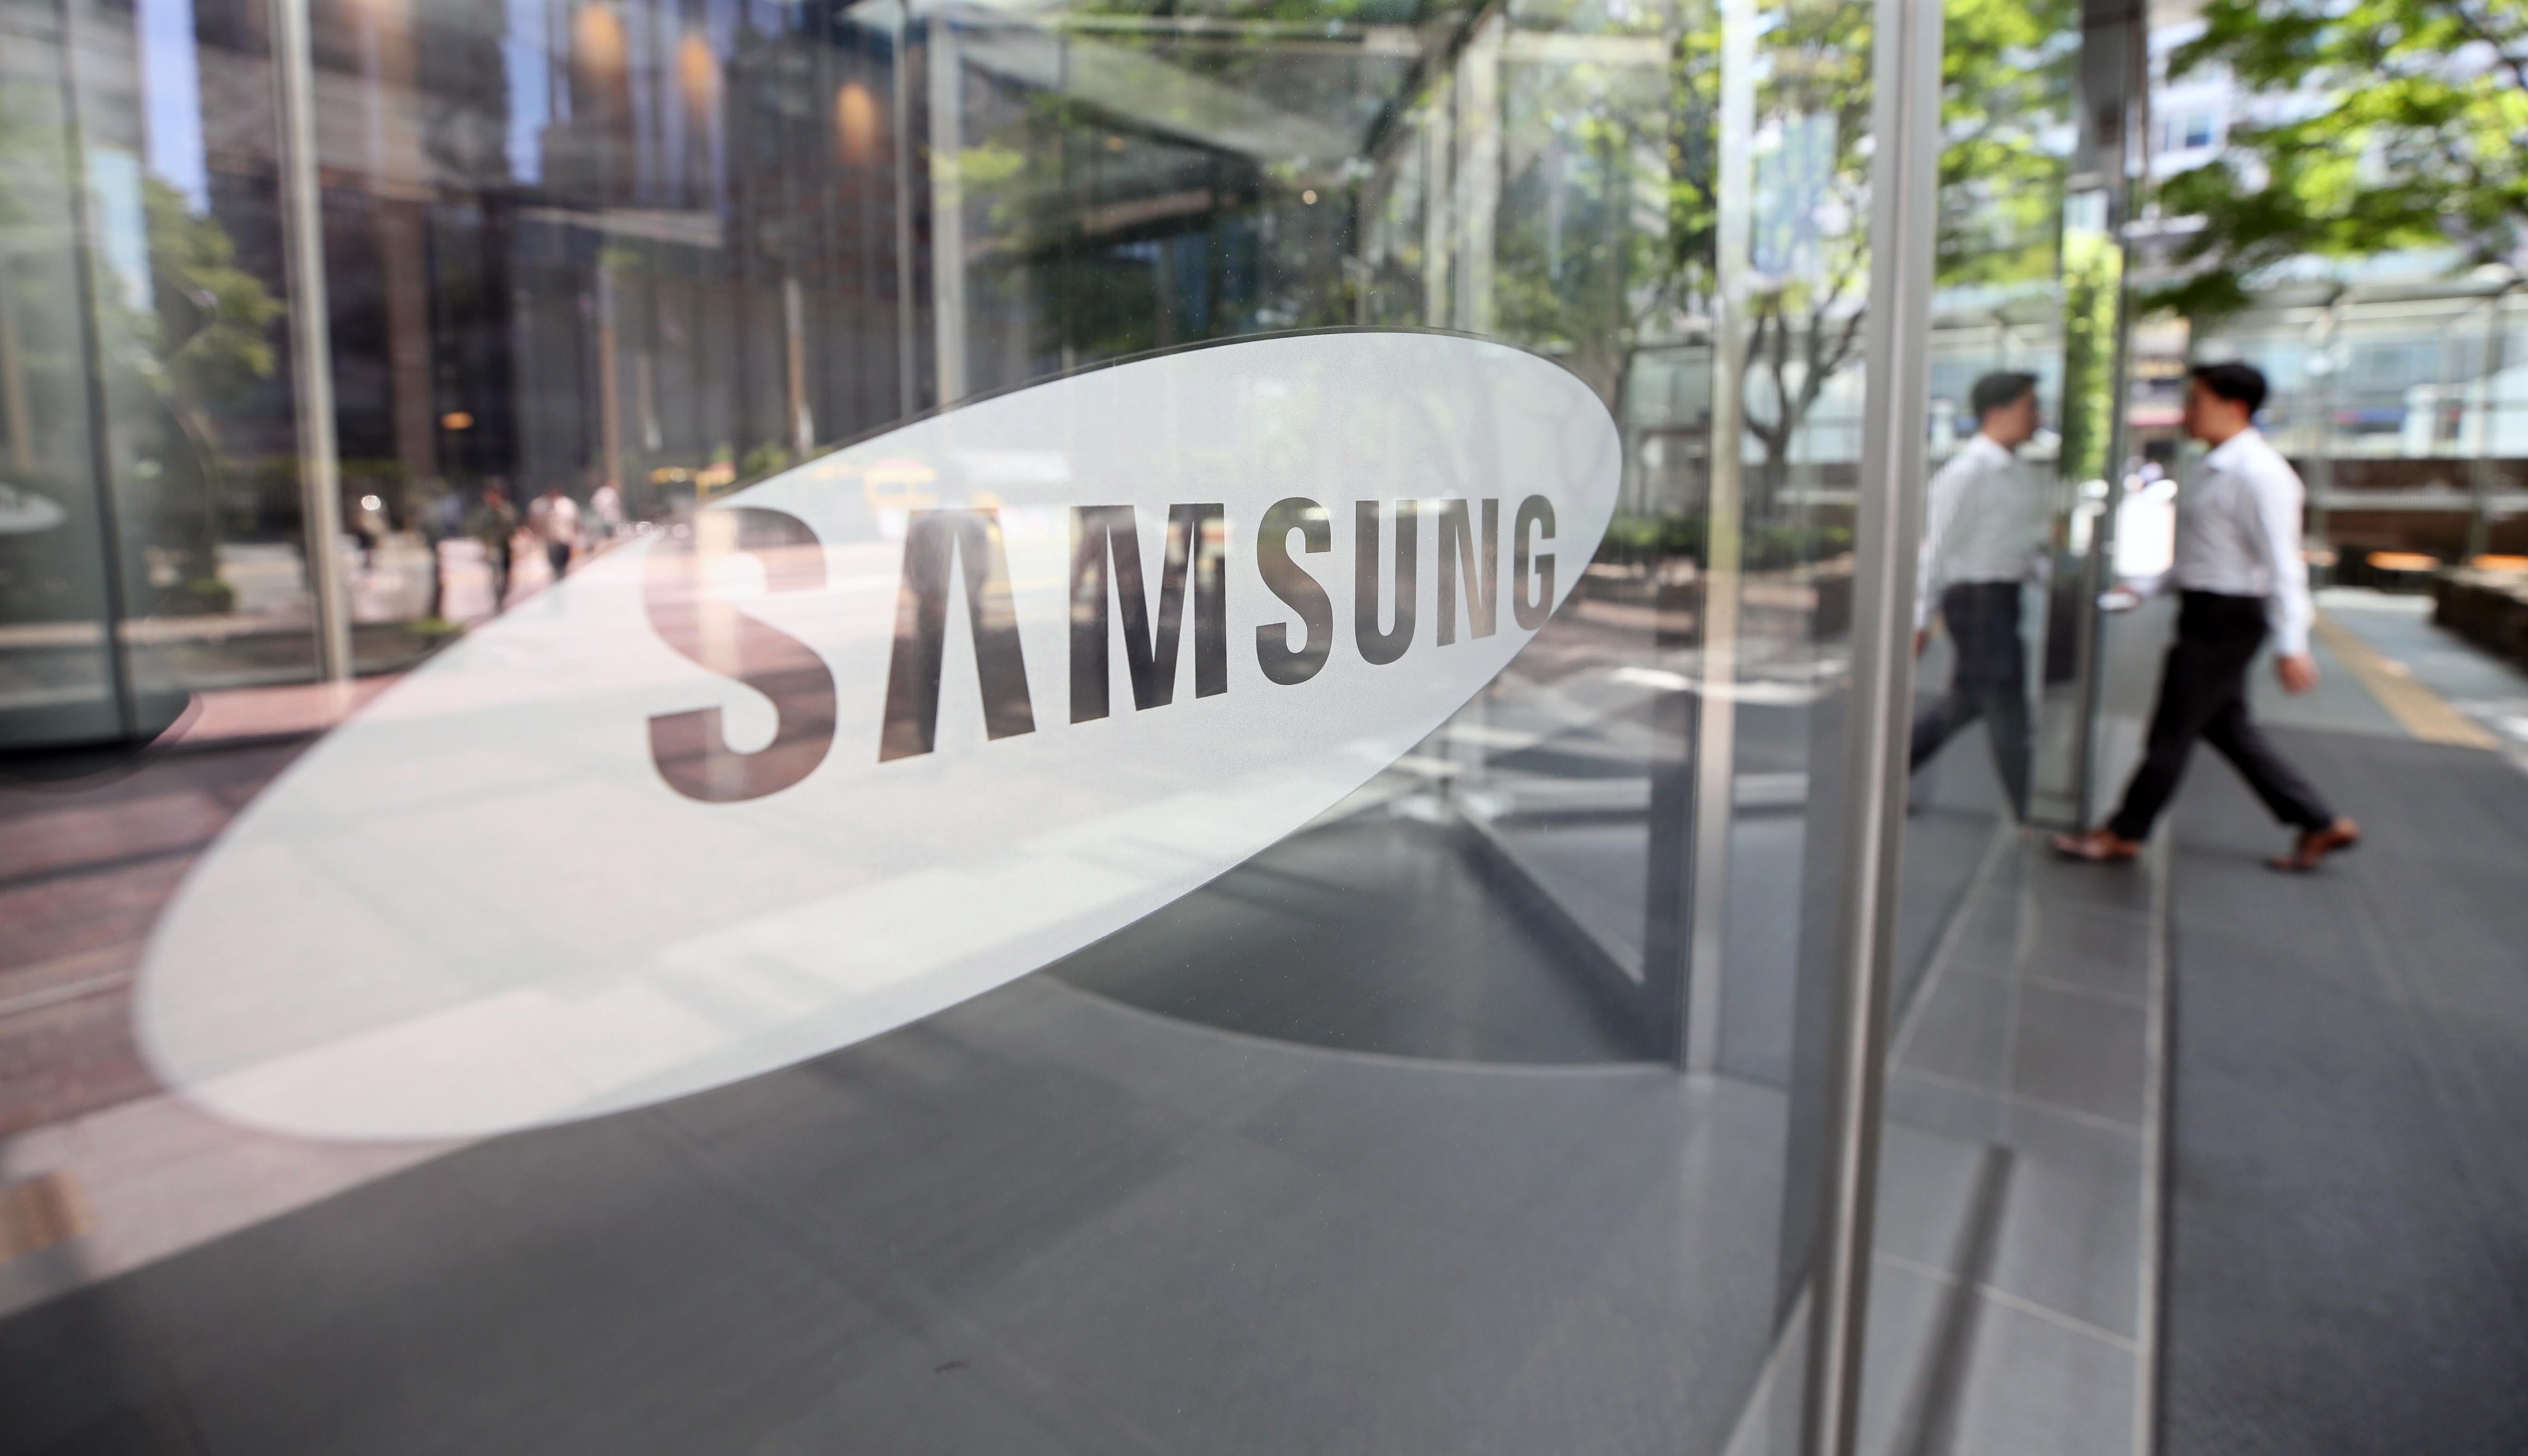 A South Korean chip executive is accused of illegally acquiring data from Samsung to build a factory in China’s Xian. Photo: EPA-EFE/Yonhap